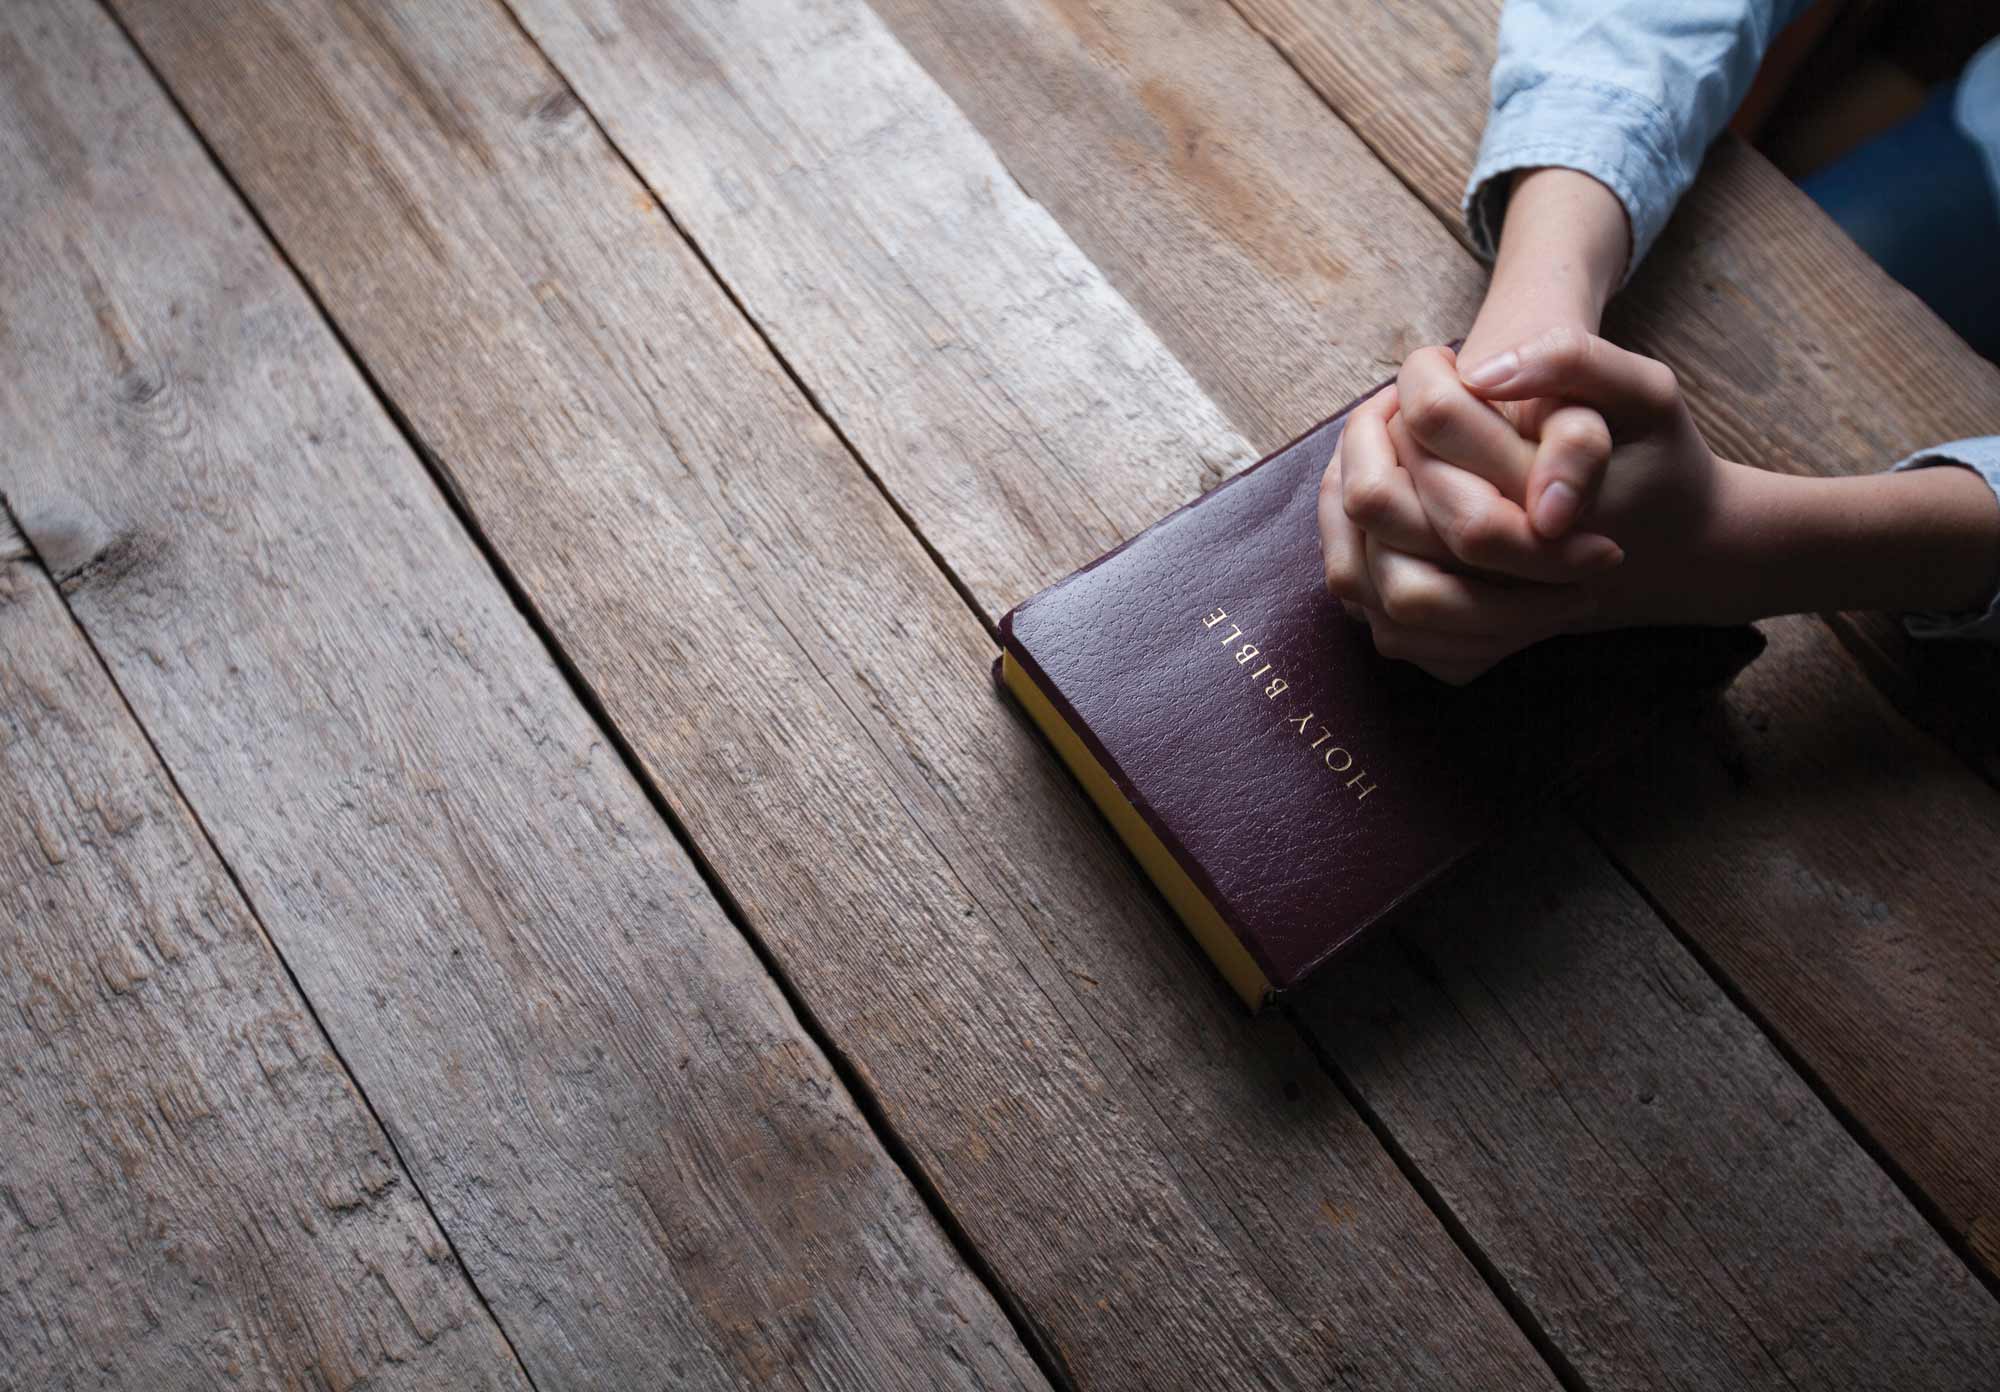 Hands clasped on top of a Bible